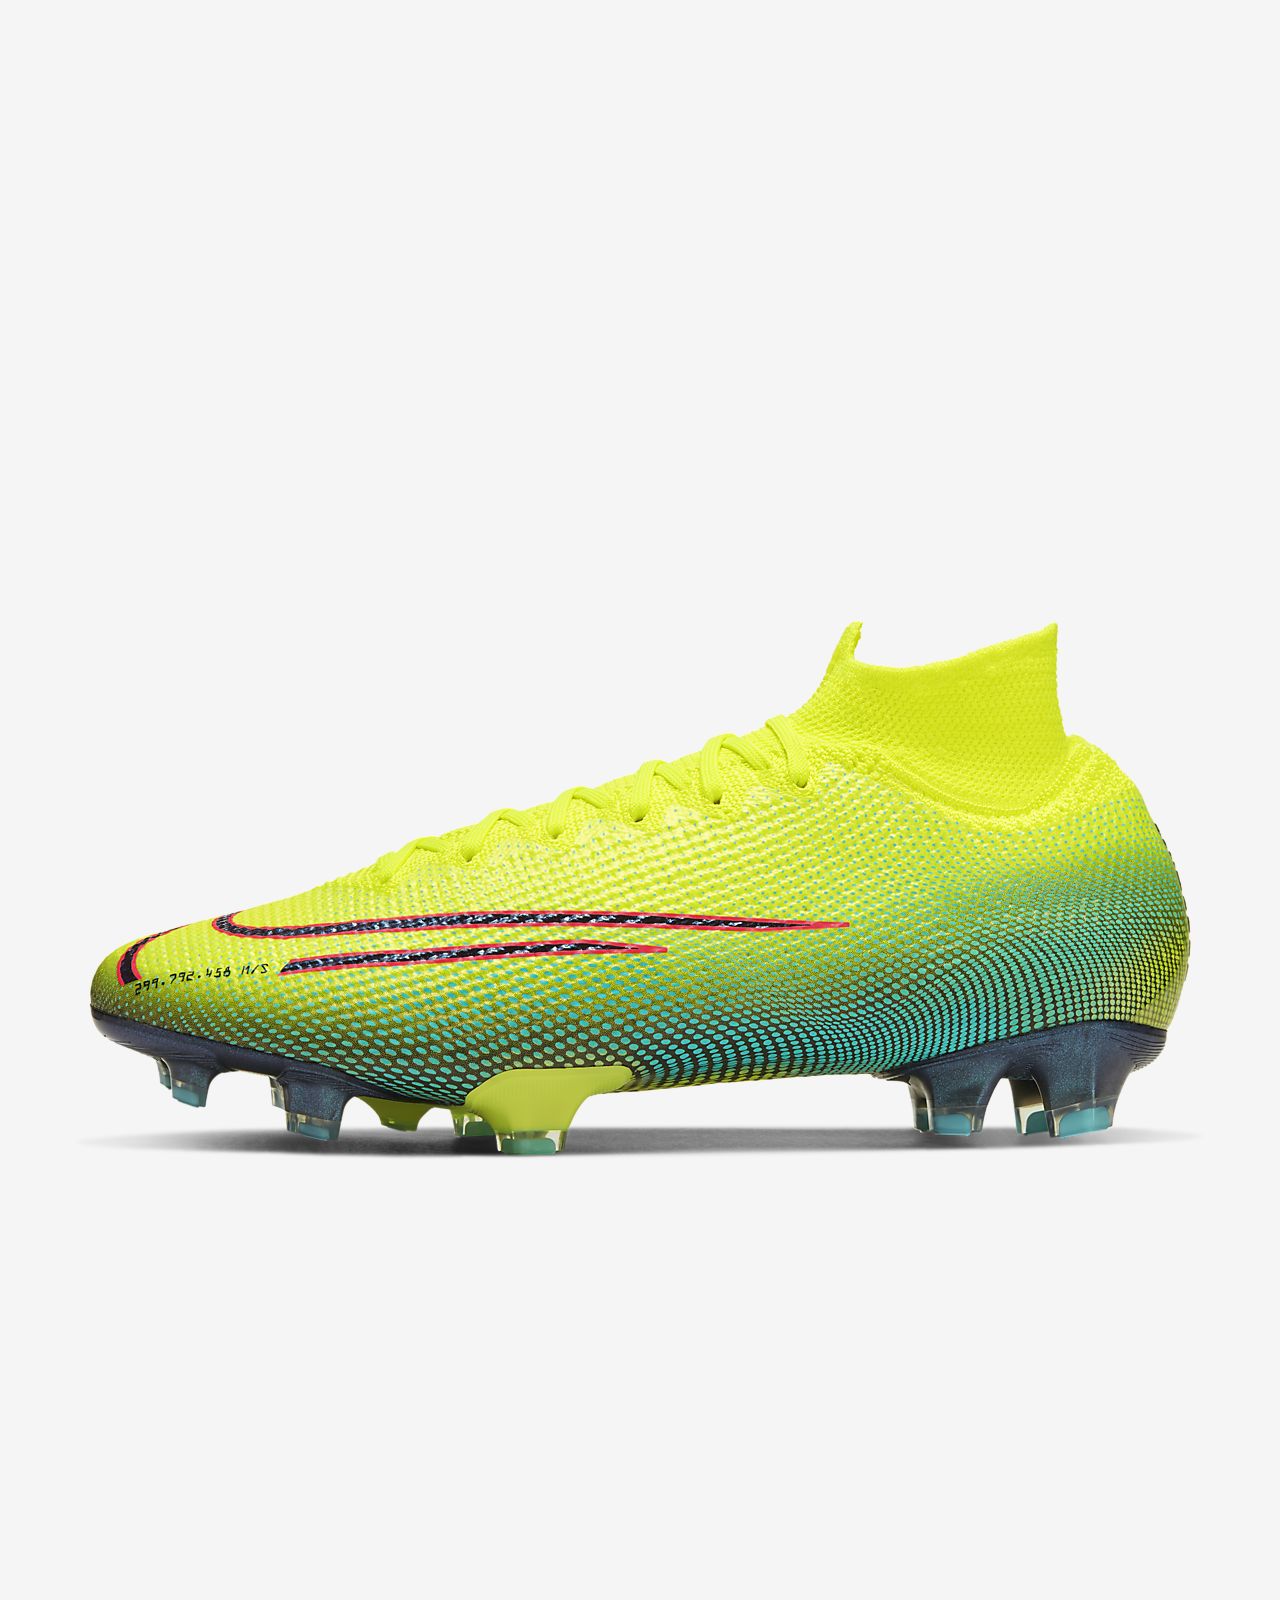 Nike Mercurial Superfly 7 Elite MDS FG Firm Ground Soccer.